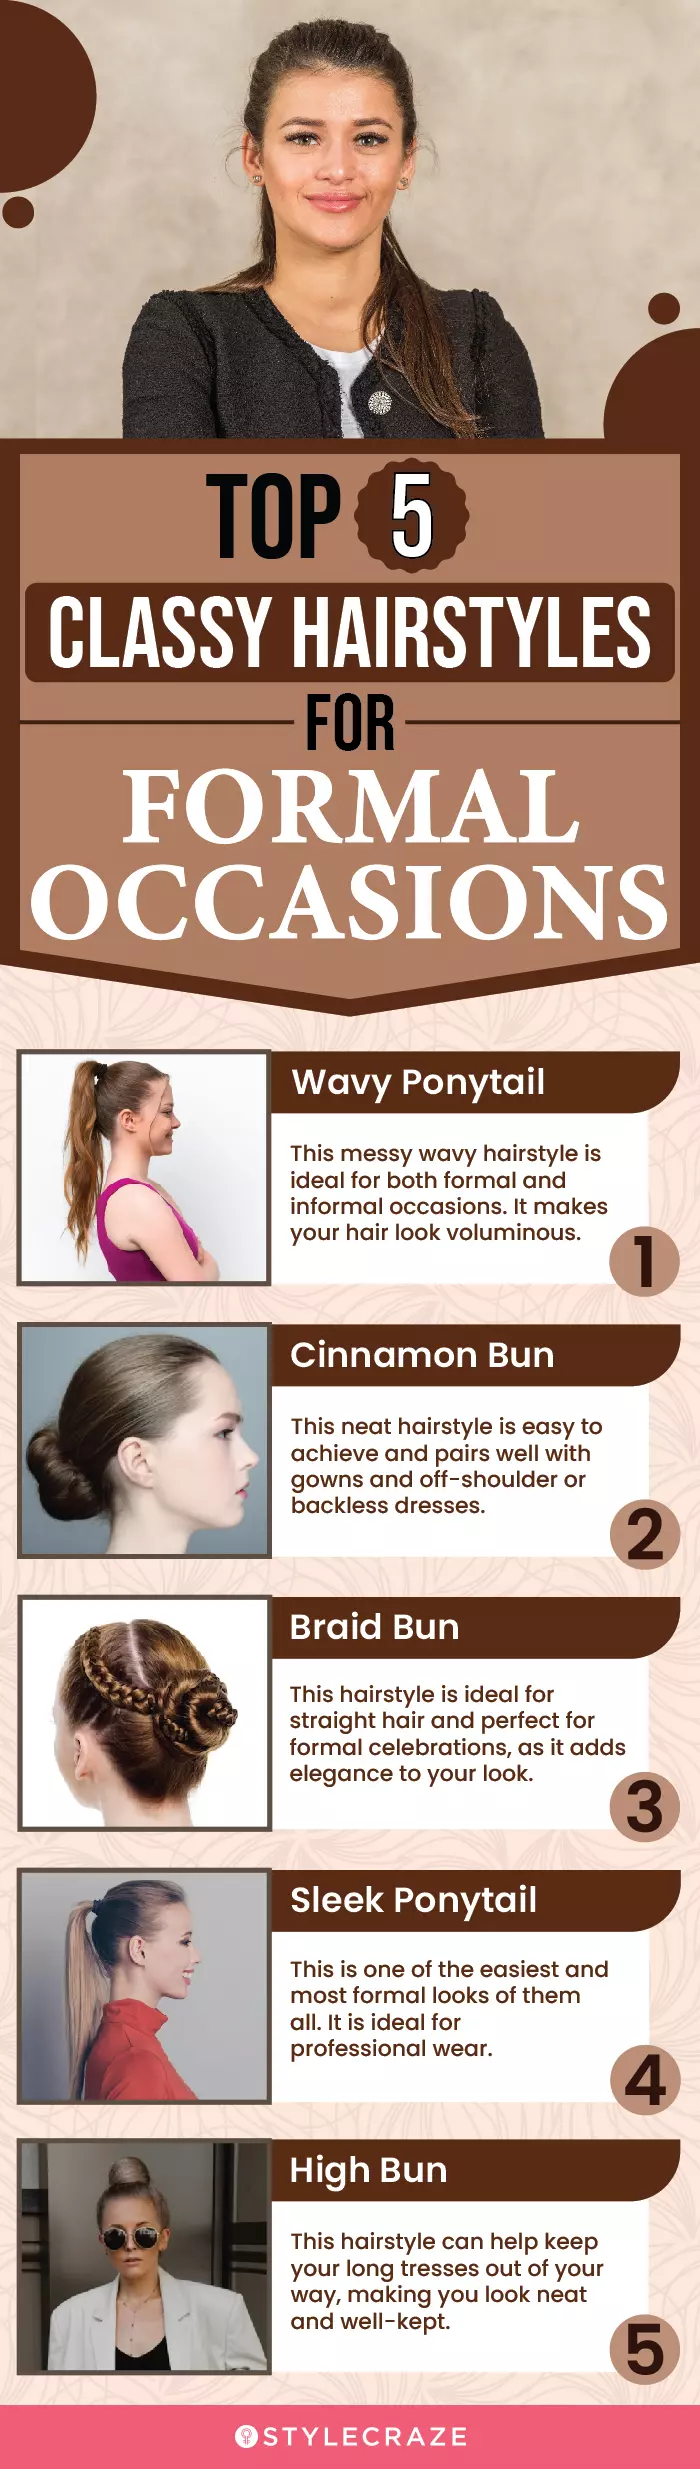 33 Half Up Half Down Hairstyles For Every Hair Type and Occasion